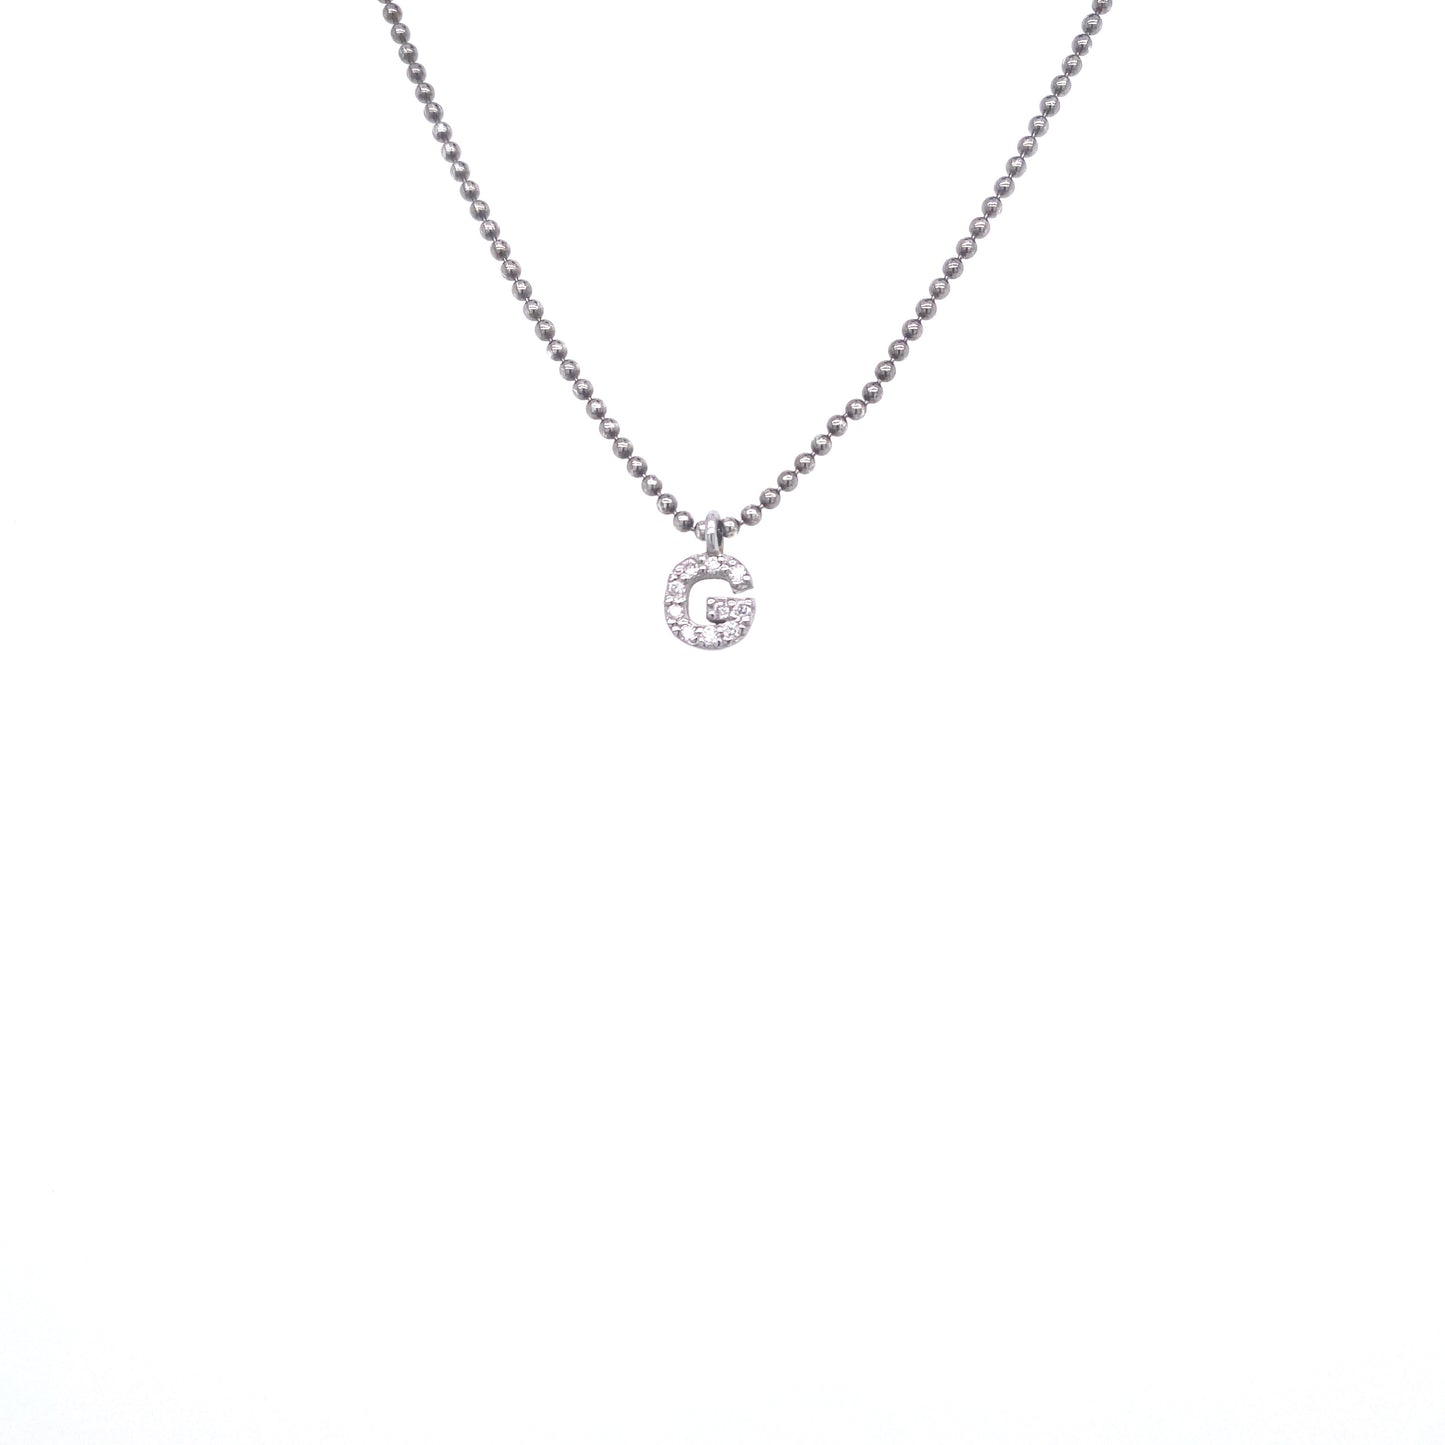 Necklace With Small Initial G and Diamond | Bernat Rubi | Luby 